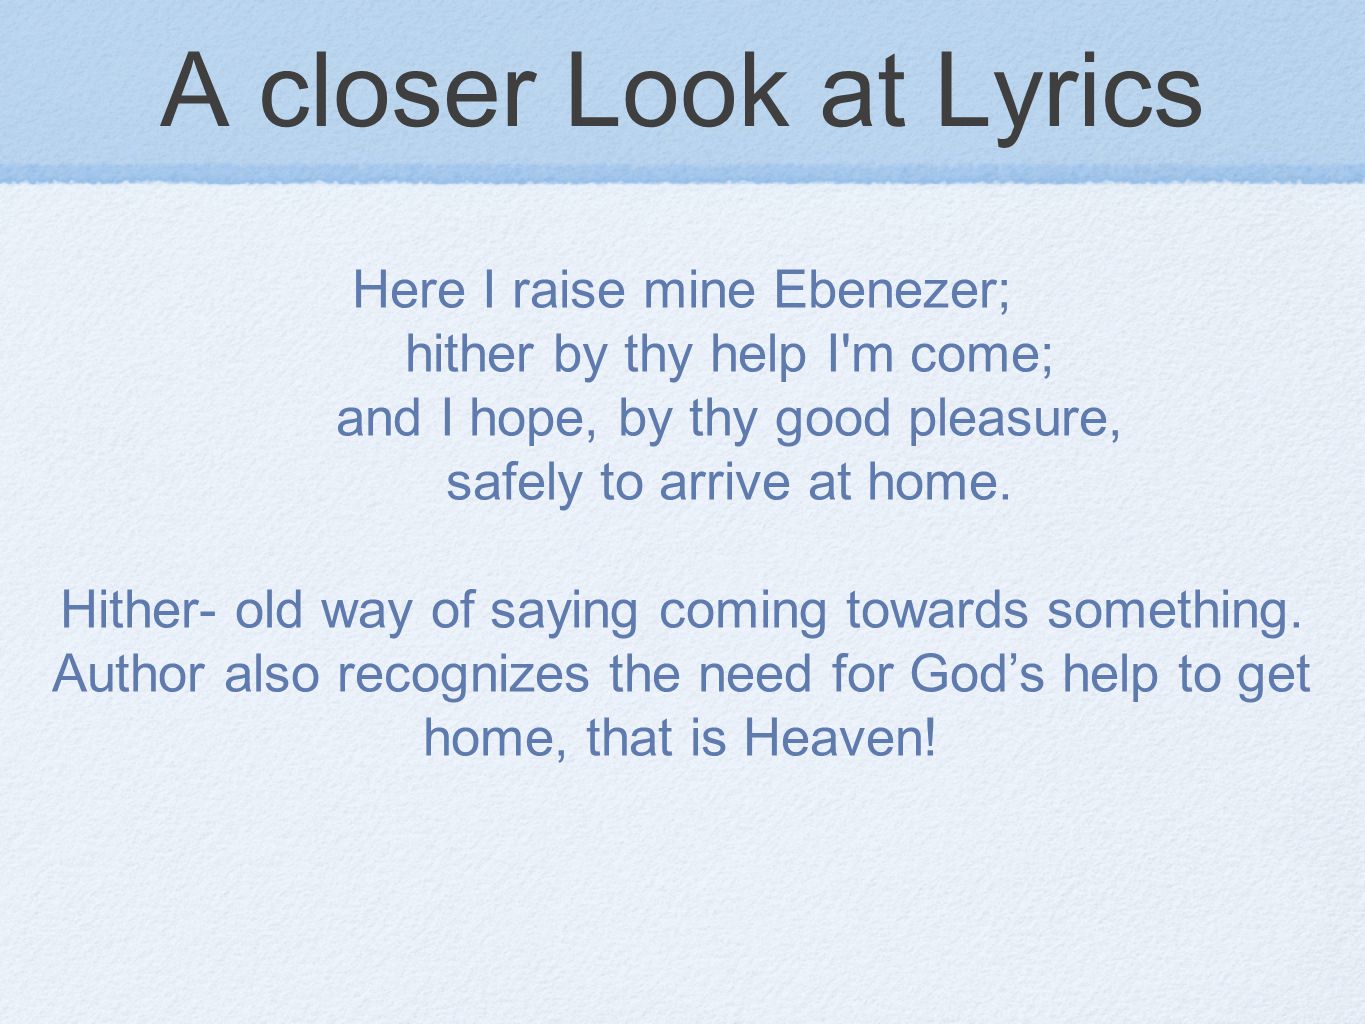 A closer Look at Lyrics Here I raise mine Ebenezer; hither by thy help I m come; and I hope, by thy good pleasure, safely to arrive at home.